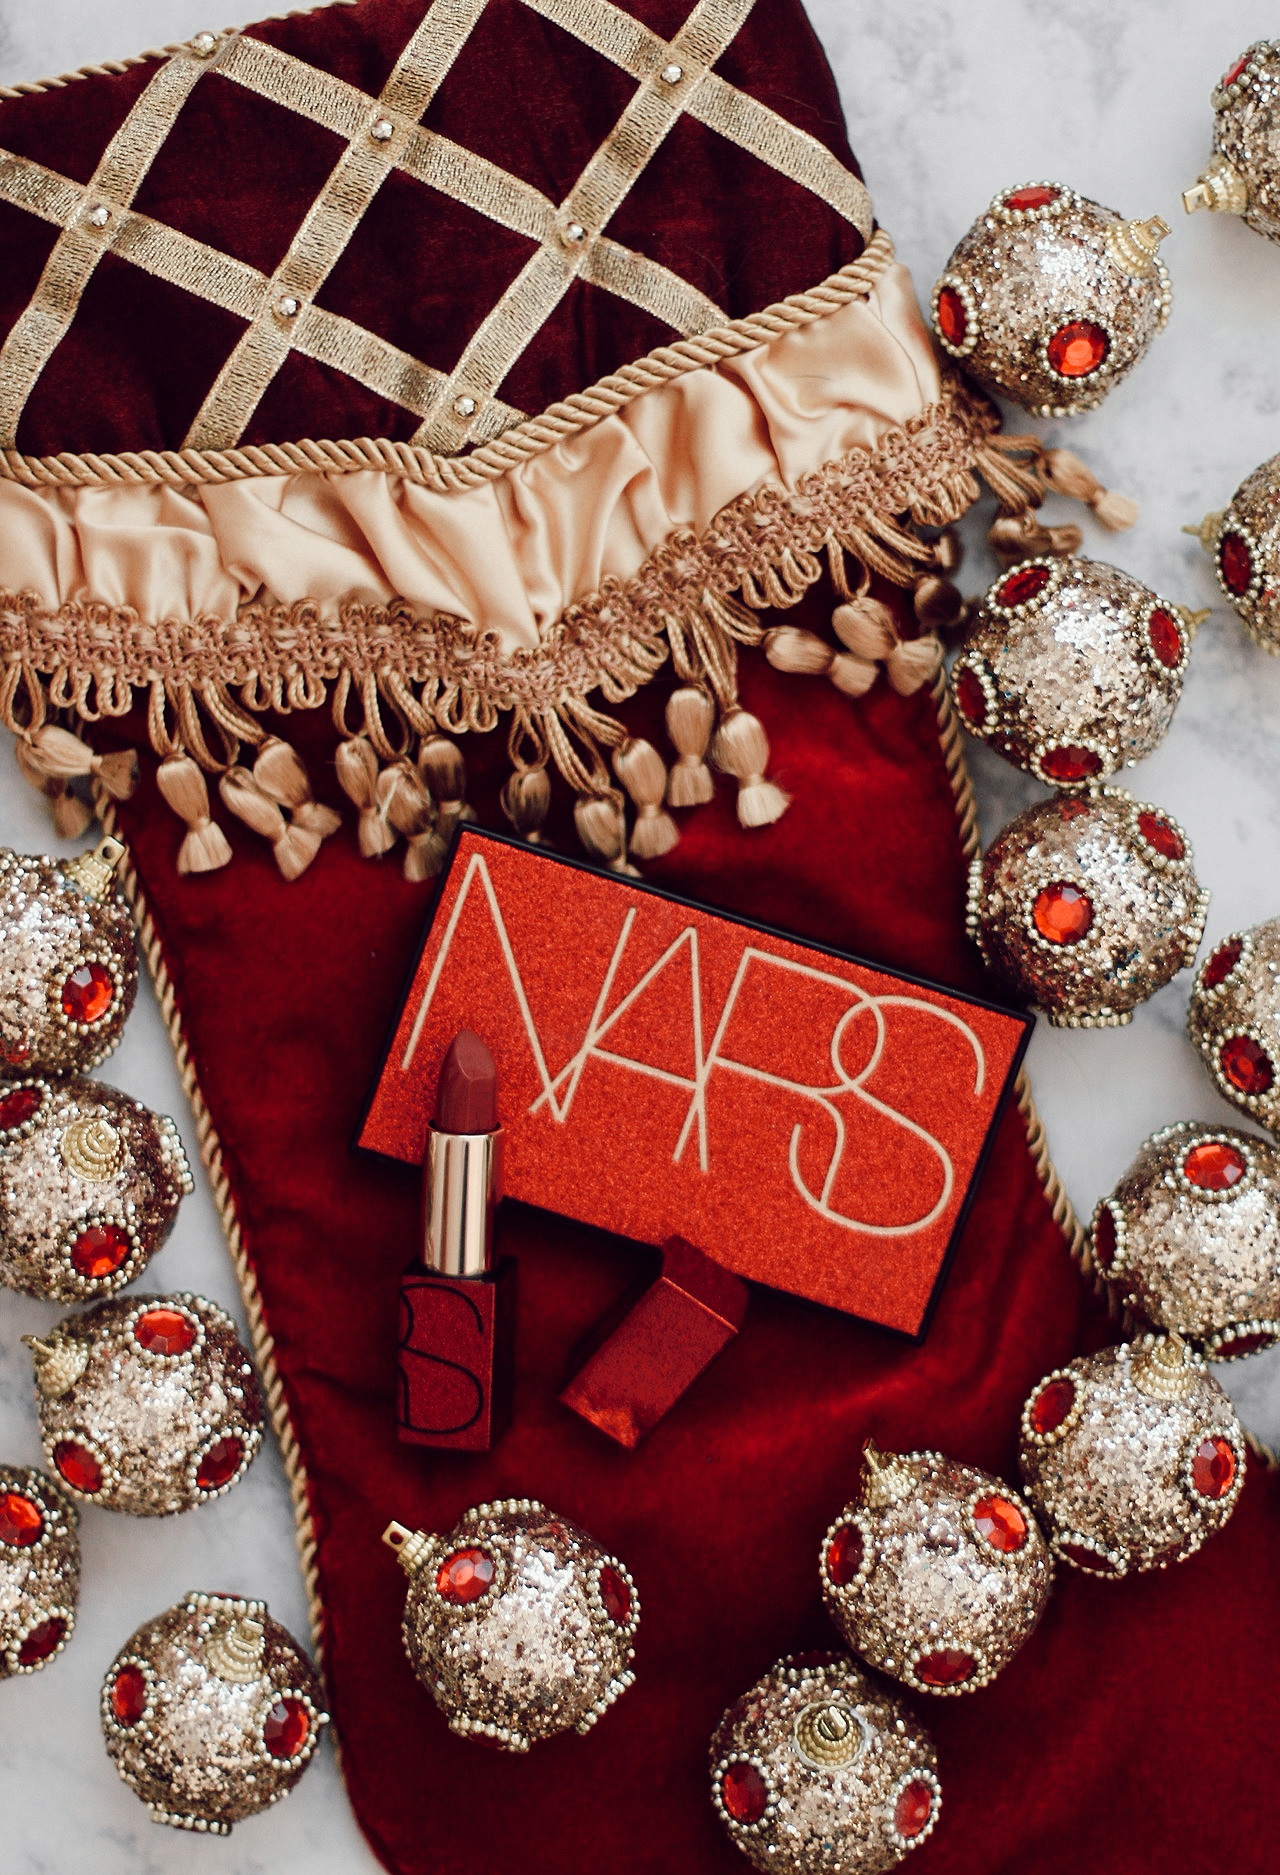 NARS Studio 54 Holiday Collection Audacious Lipstick Palette 